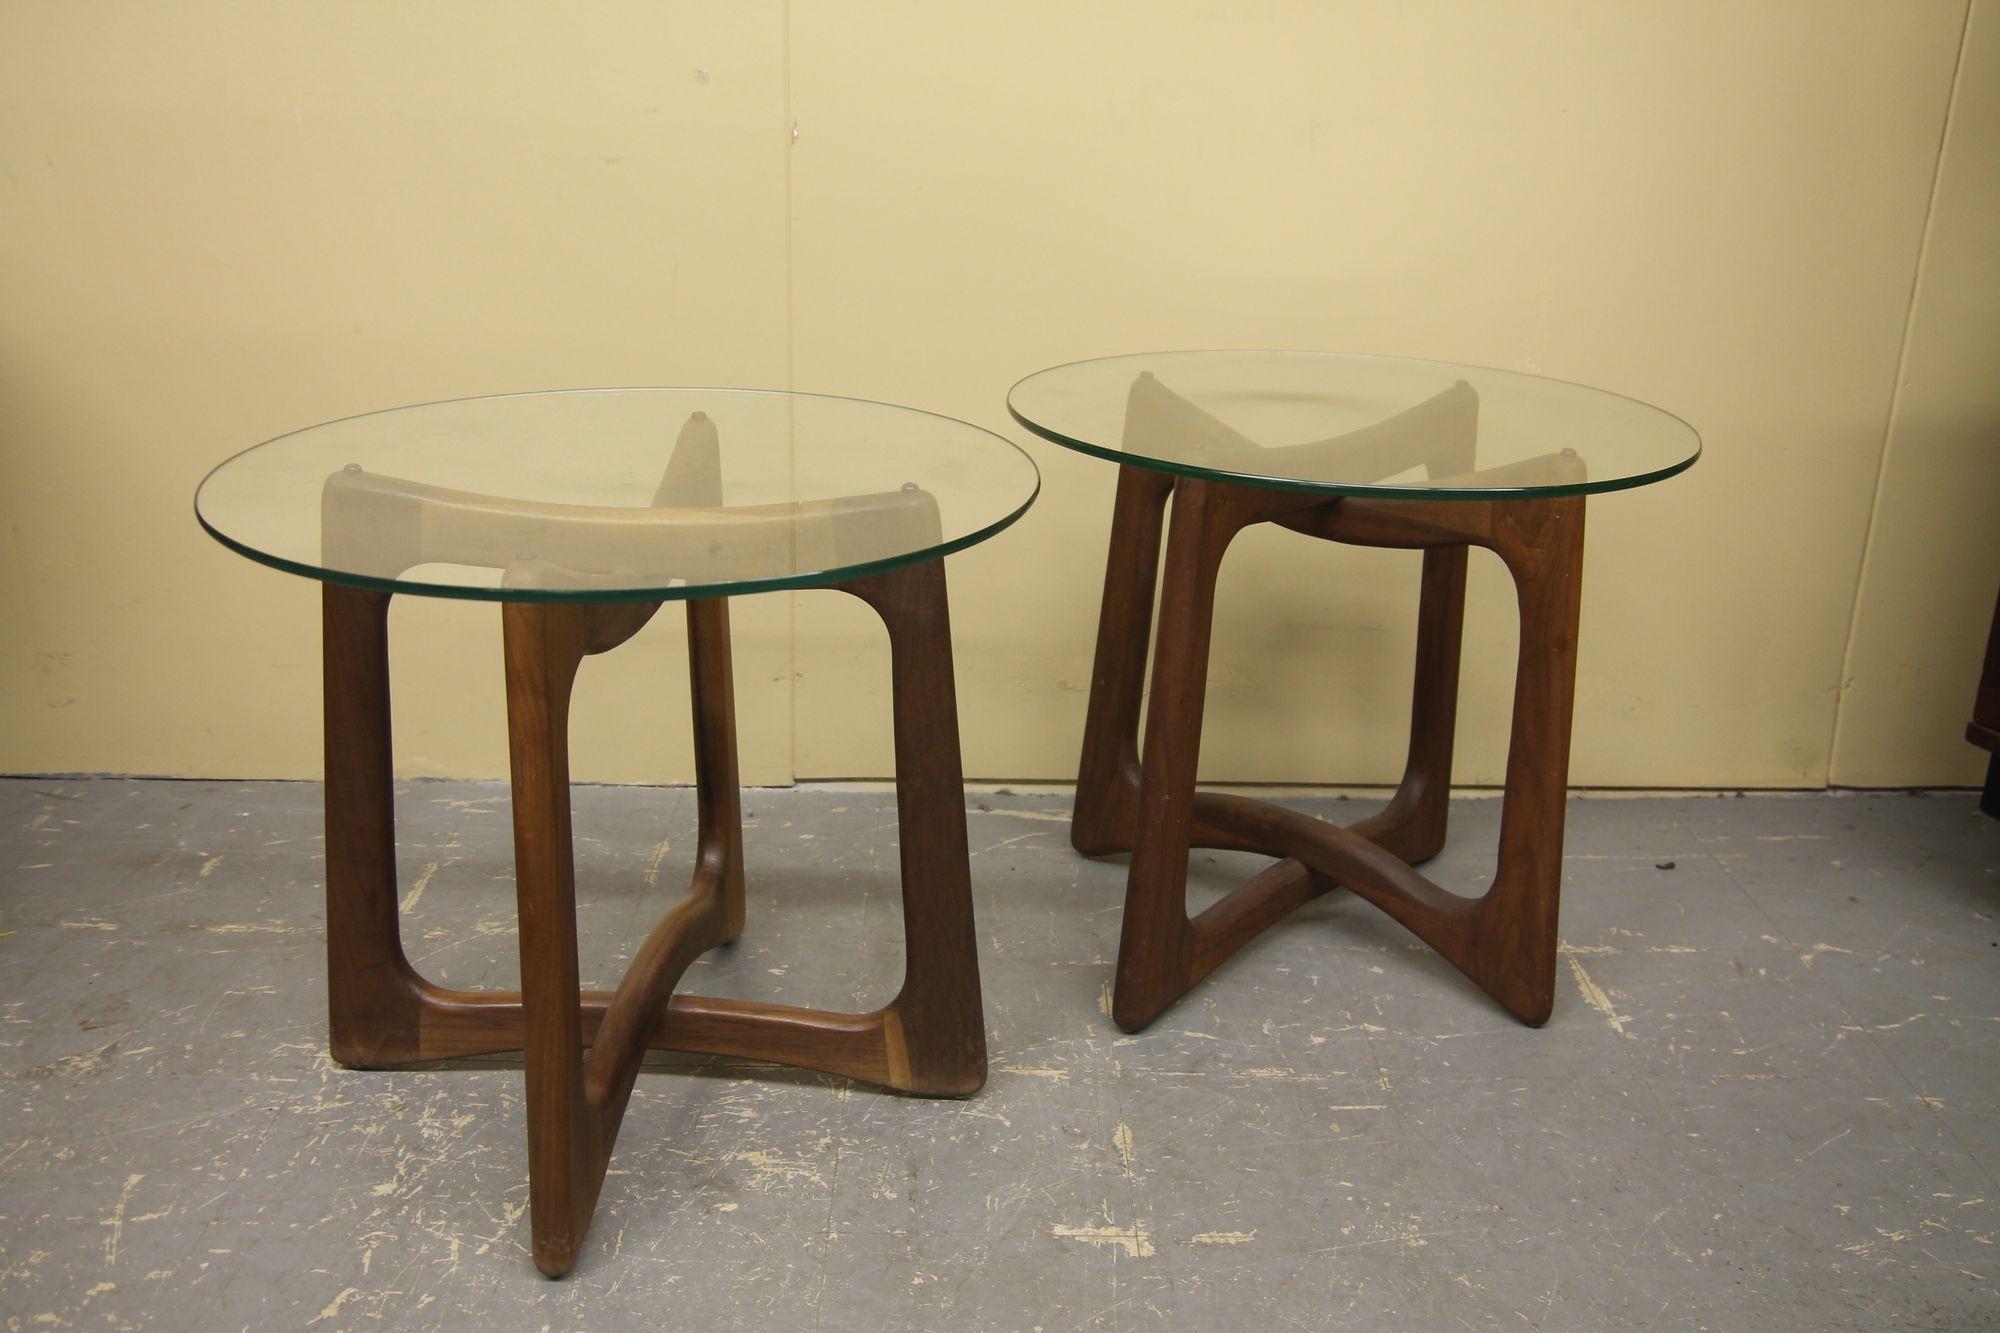 Great pair of Craft Associates side tables designed by Adrian Pearsall. This style does not show up often. Have also just listed the coffee table that went with these tables.